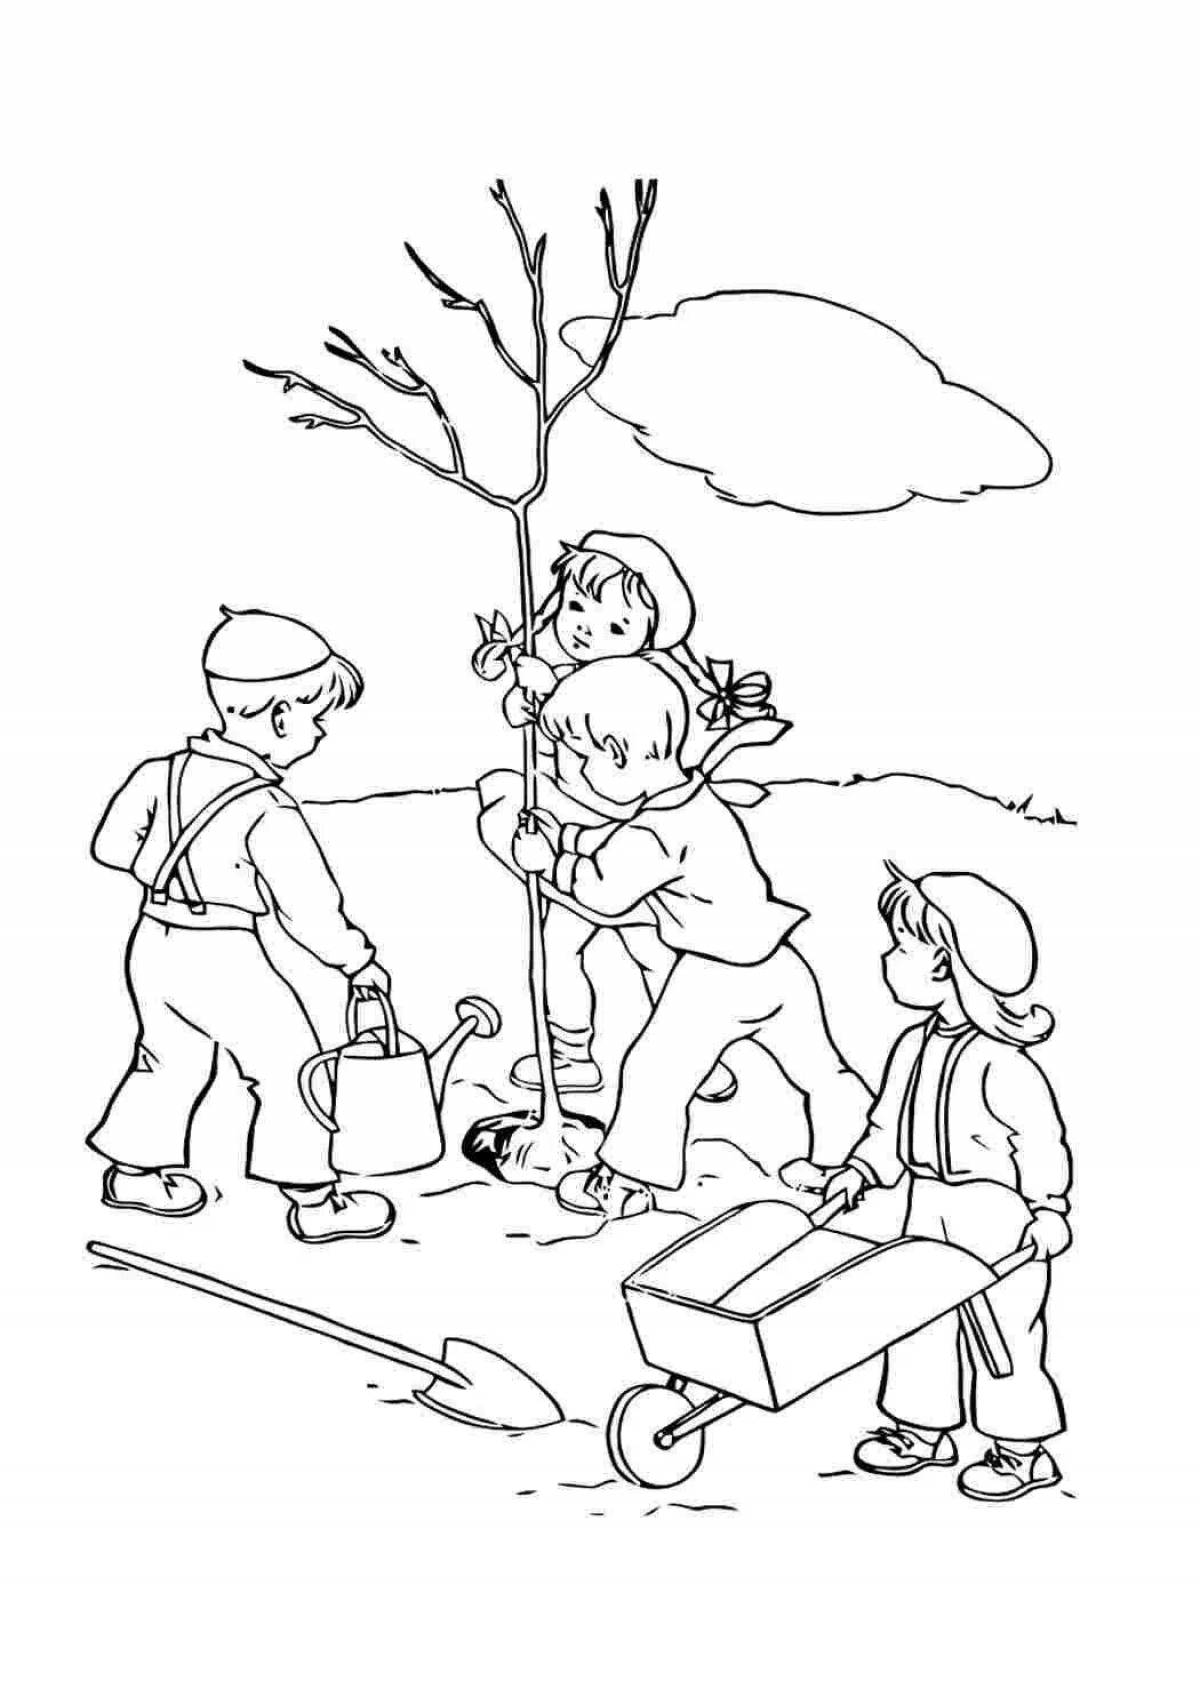 Inspiring man and nature coloring page